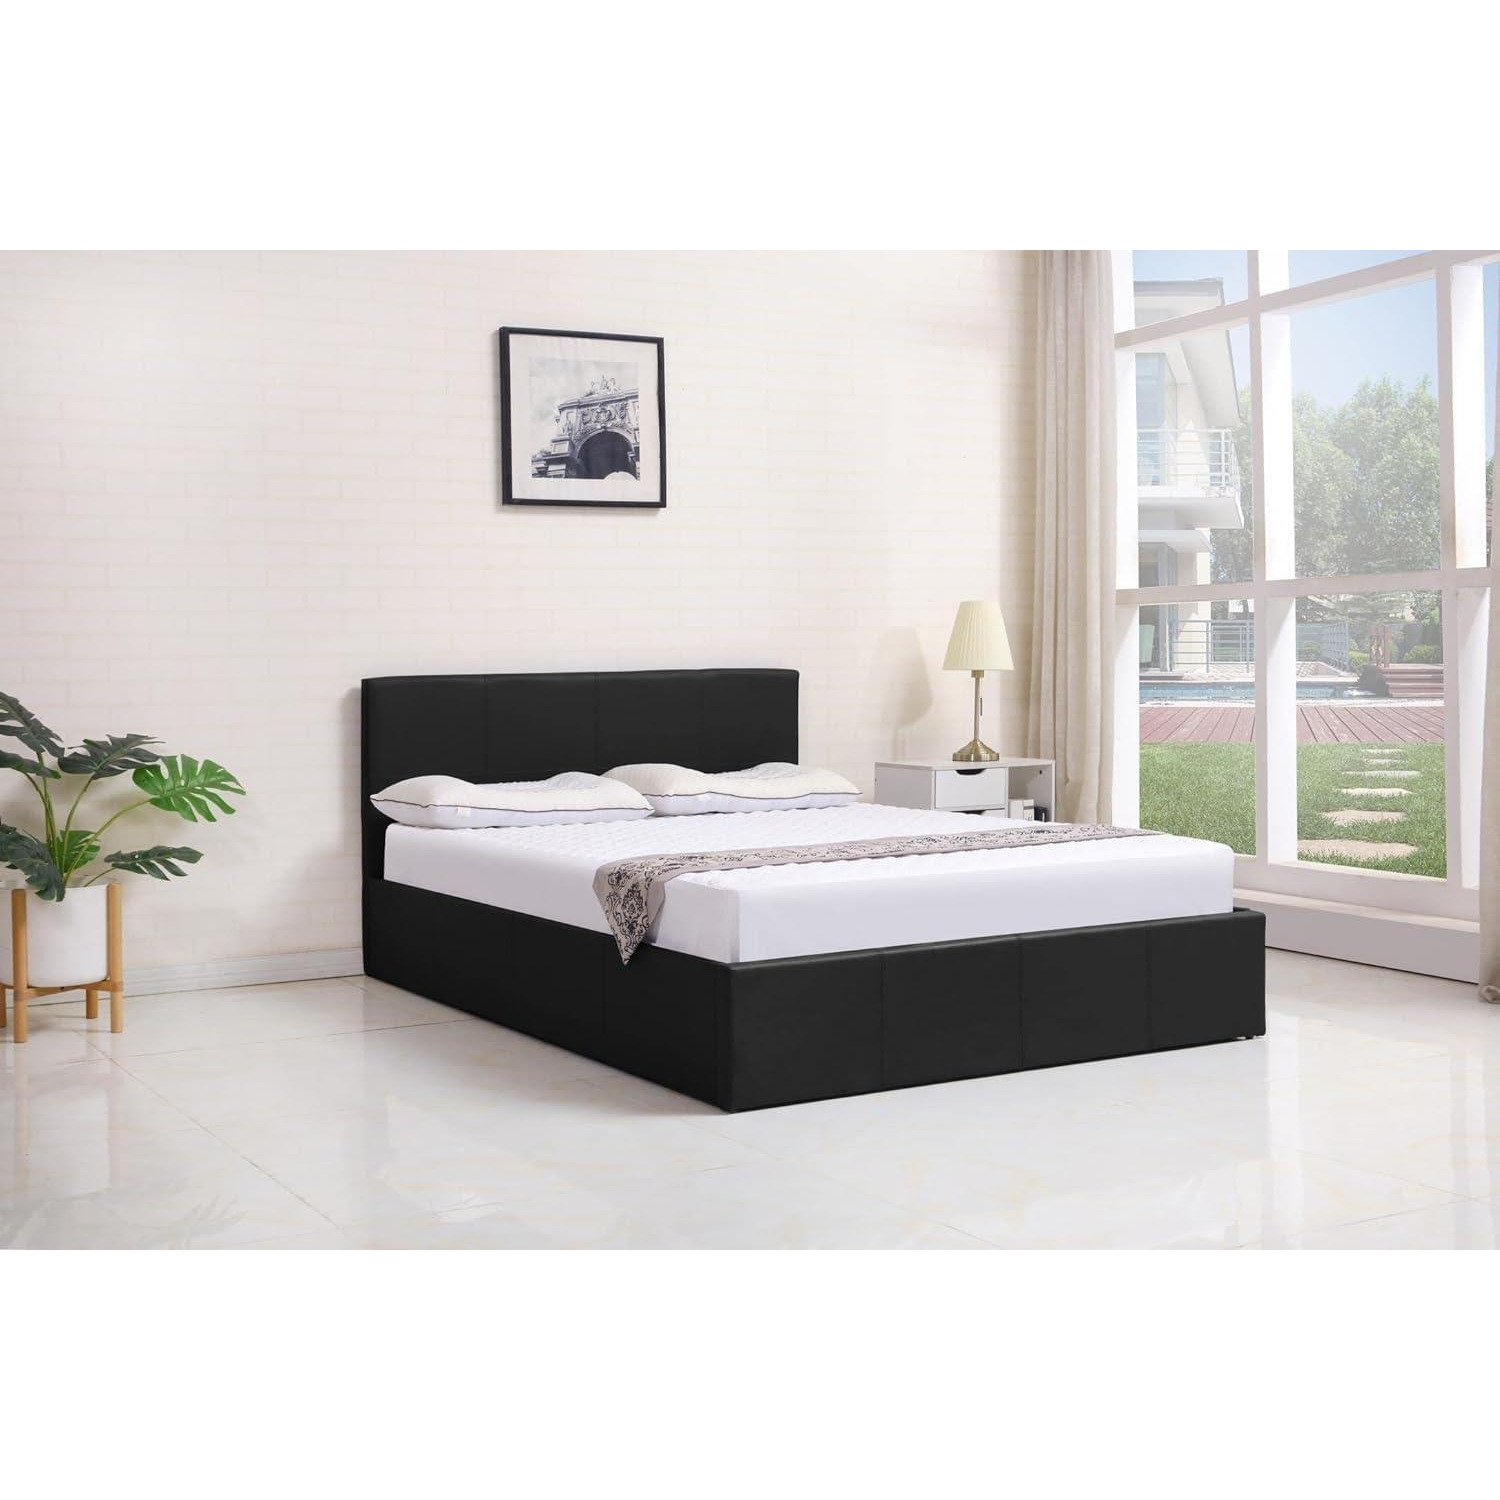 Ottoman Storage Bed black 4ft small double velvet cushioned bedroom - image 1